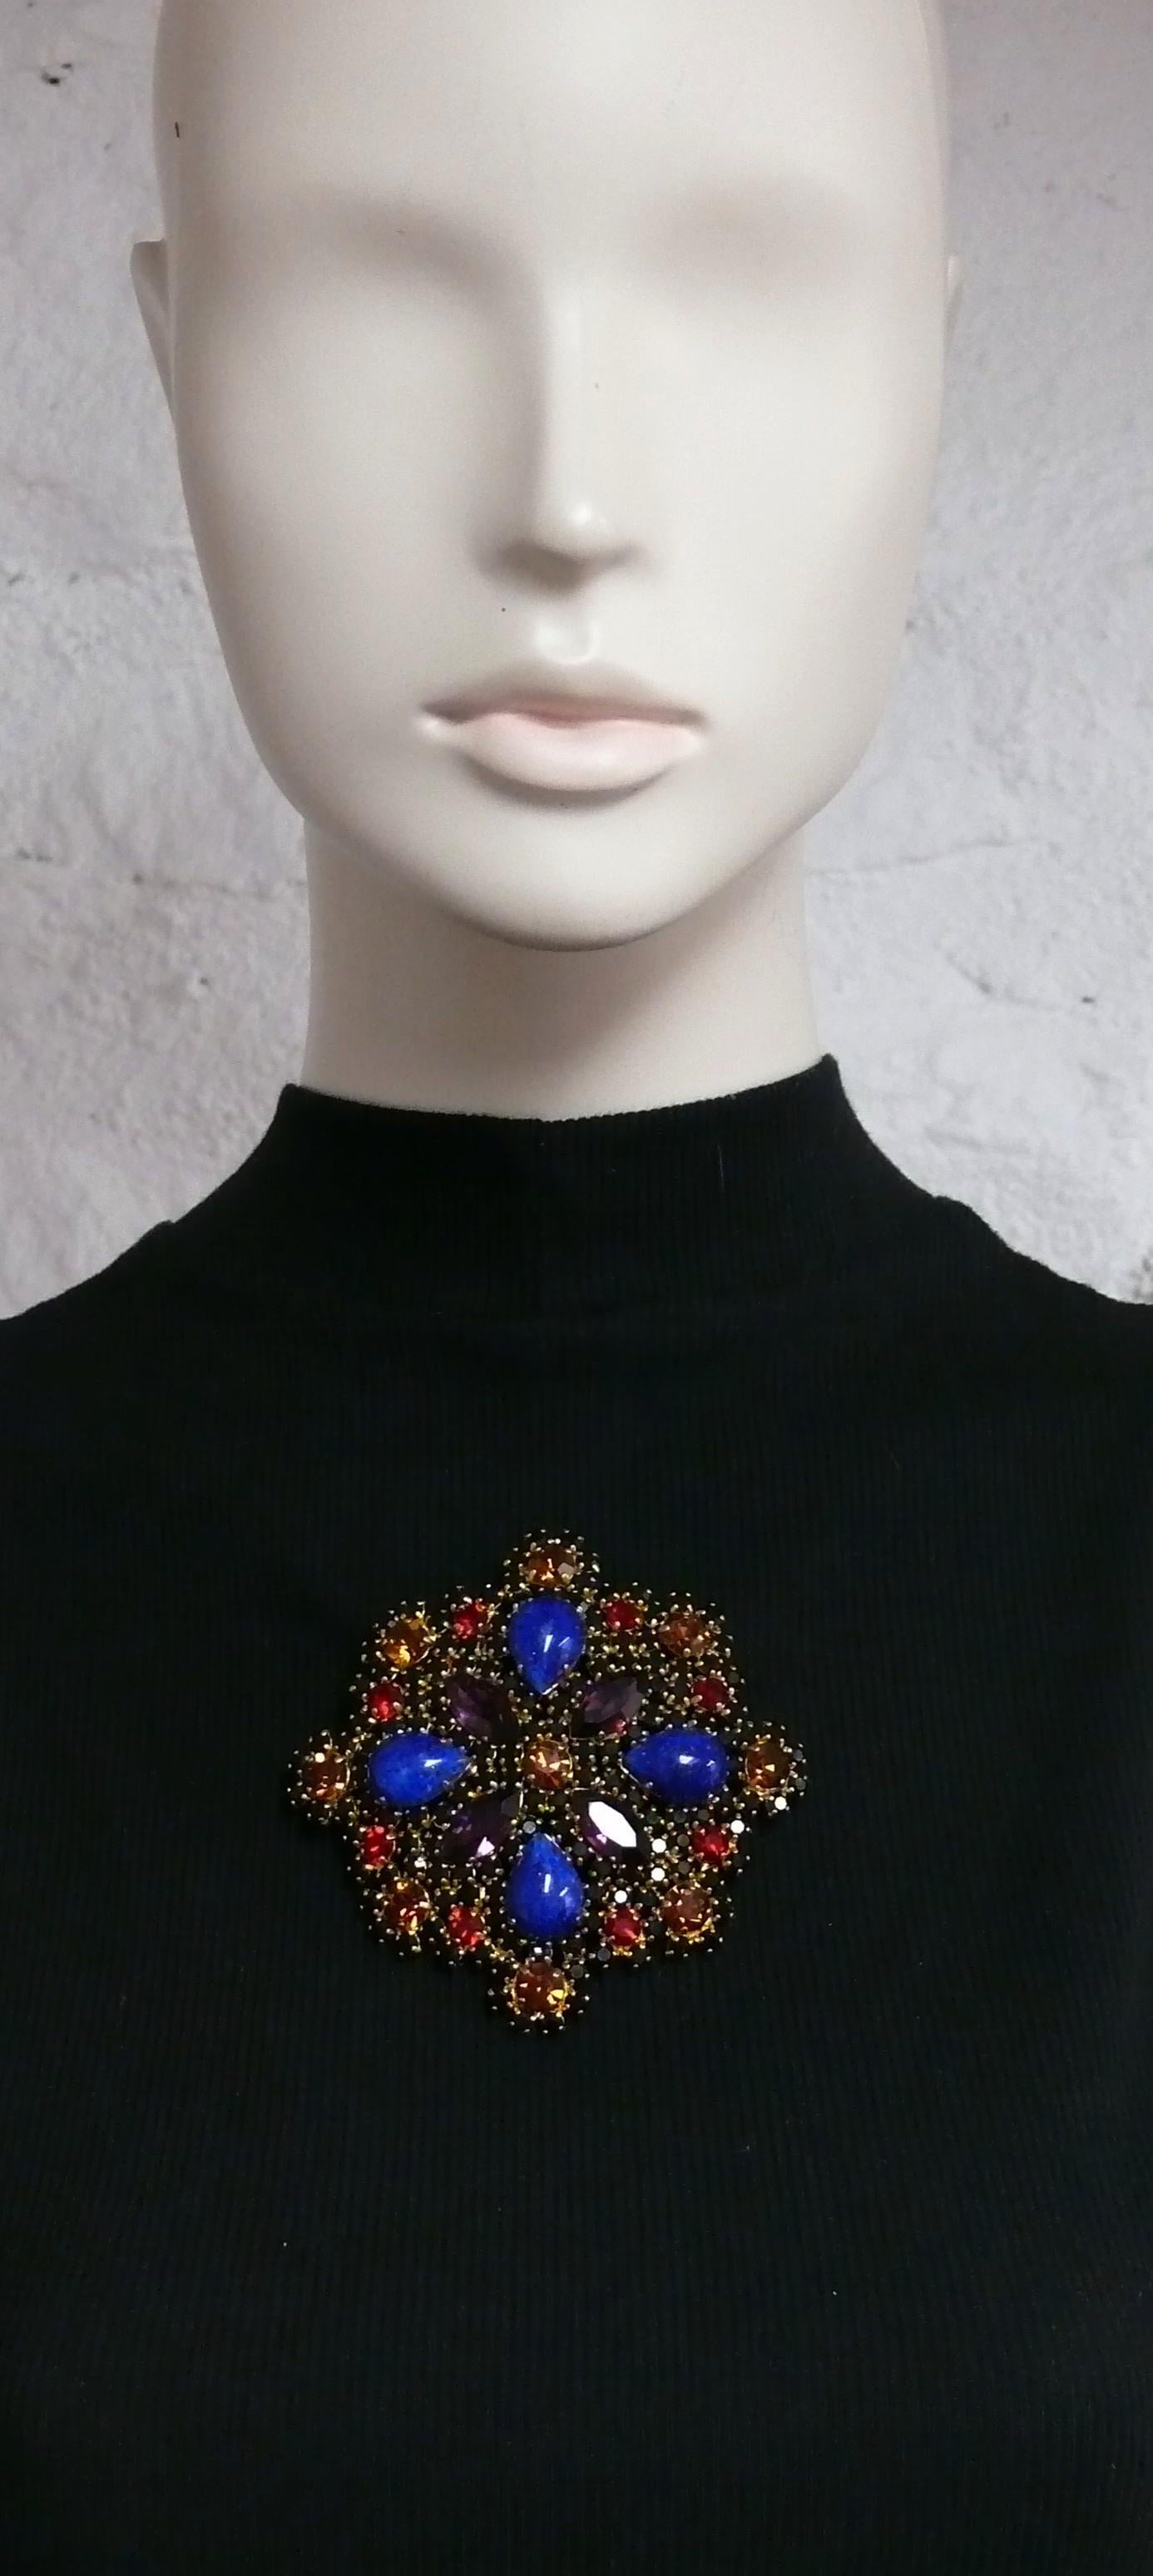 CHRISTIAN DIOR vintage massive gold toned brooch embellished with multicolored crystals (color shades : jet black, ruby red, topaz and amethyst) and faux lapis lazuli glass pear cabochons.

Can be worn as a pendant or brooch.

Marked CHRISTIAN DIOR